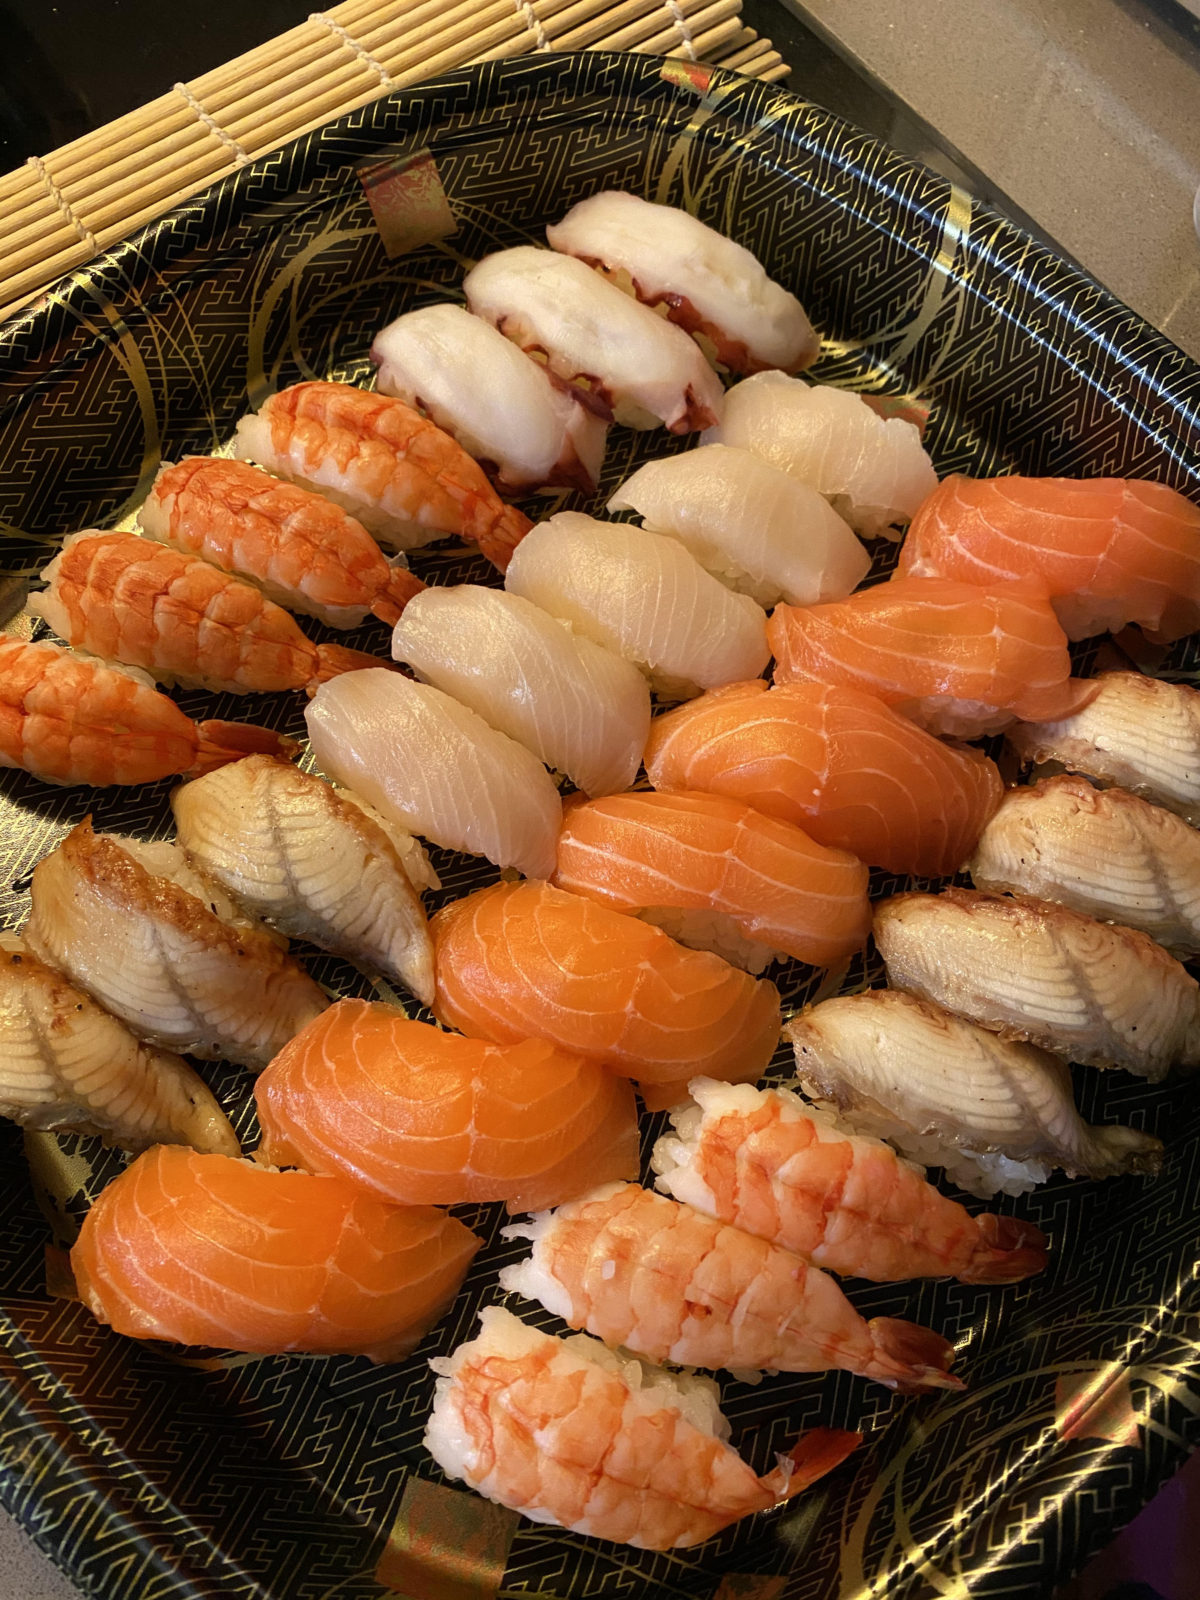 Have you already tried to prepare sushi after the course?